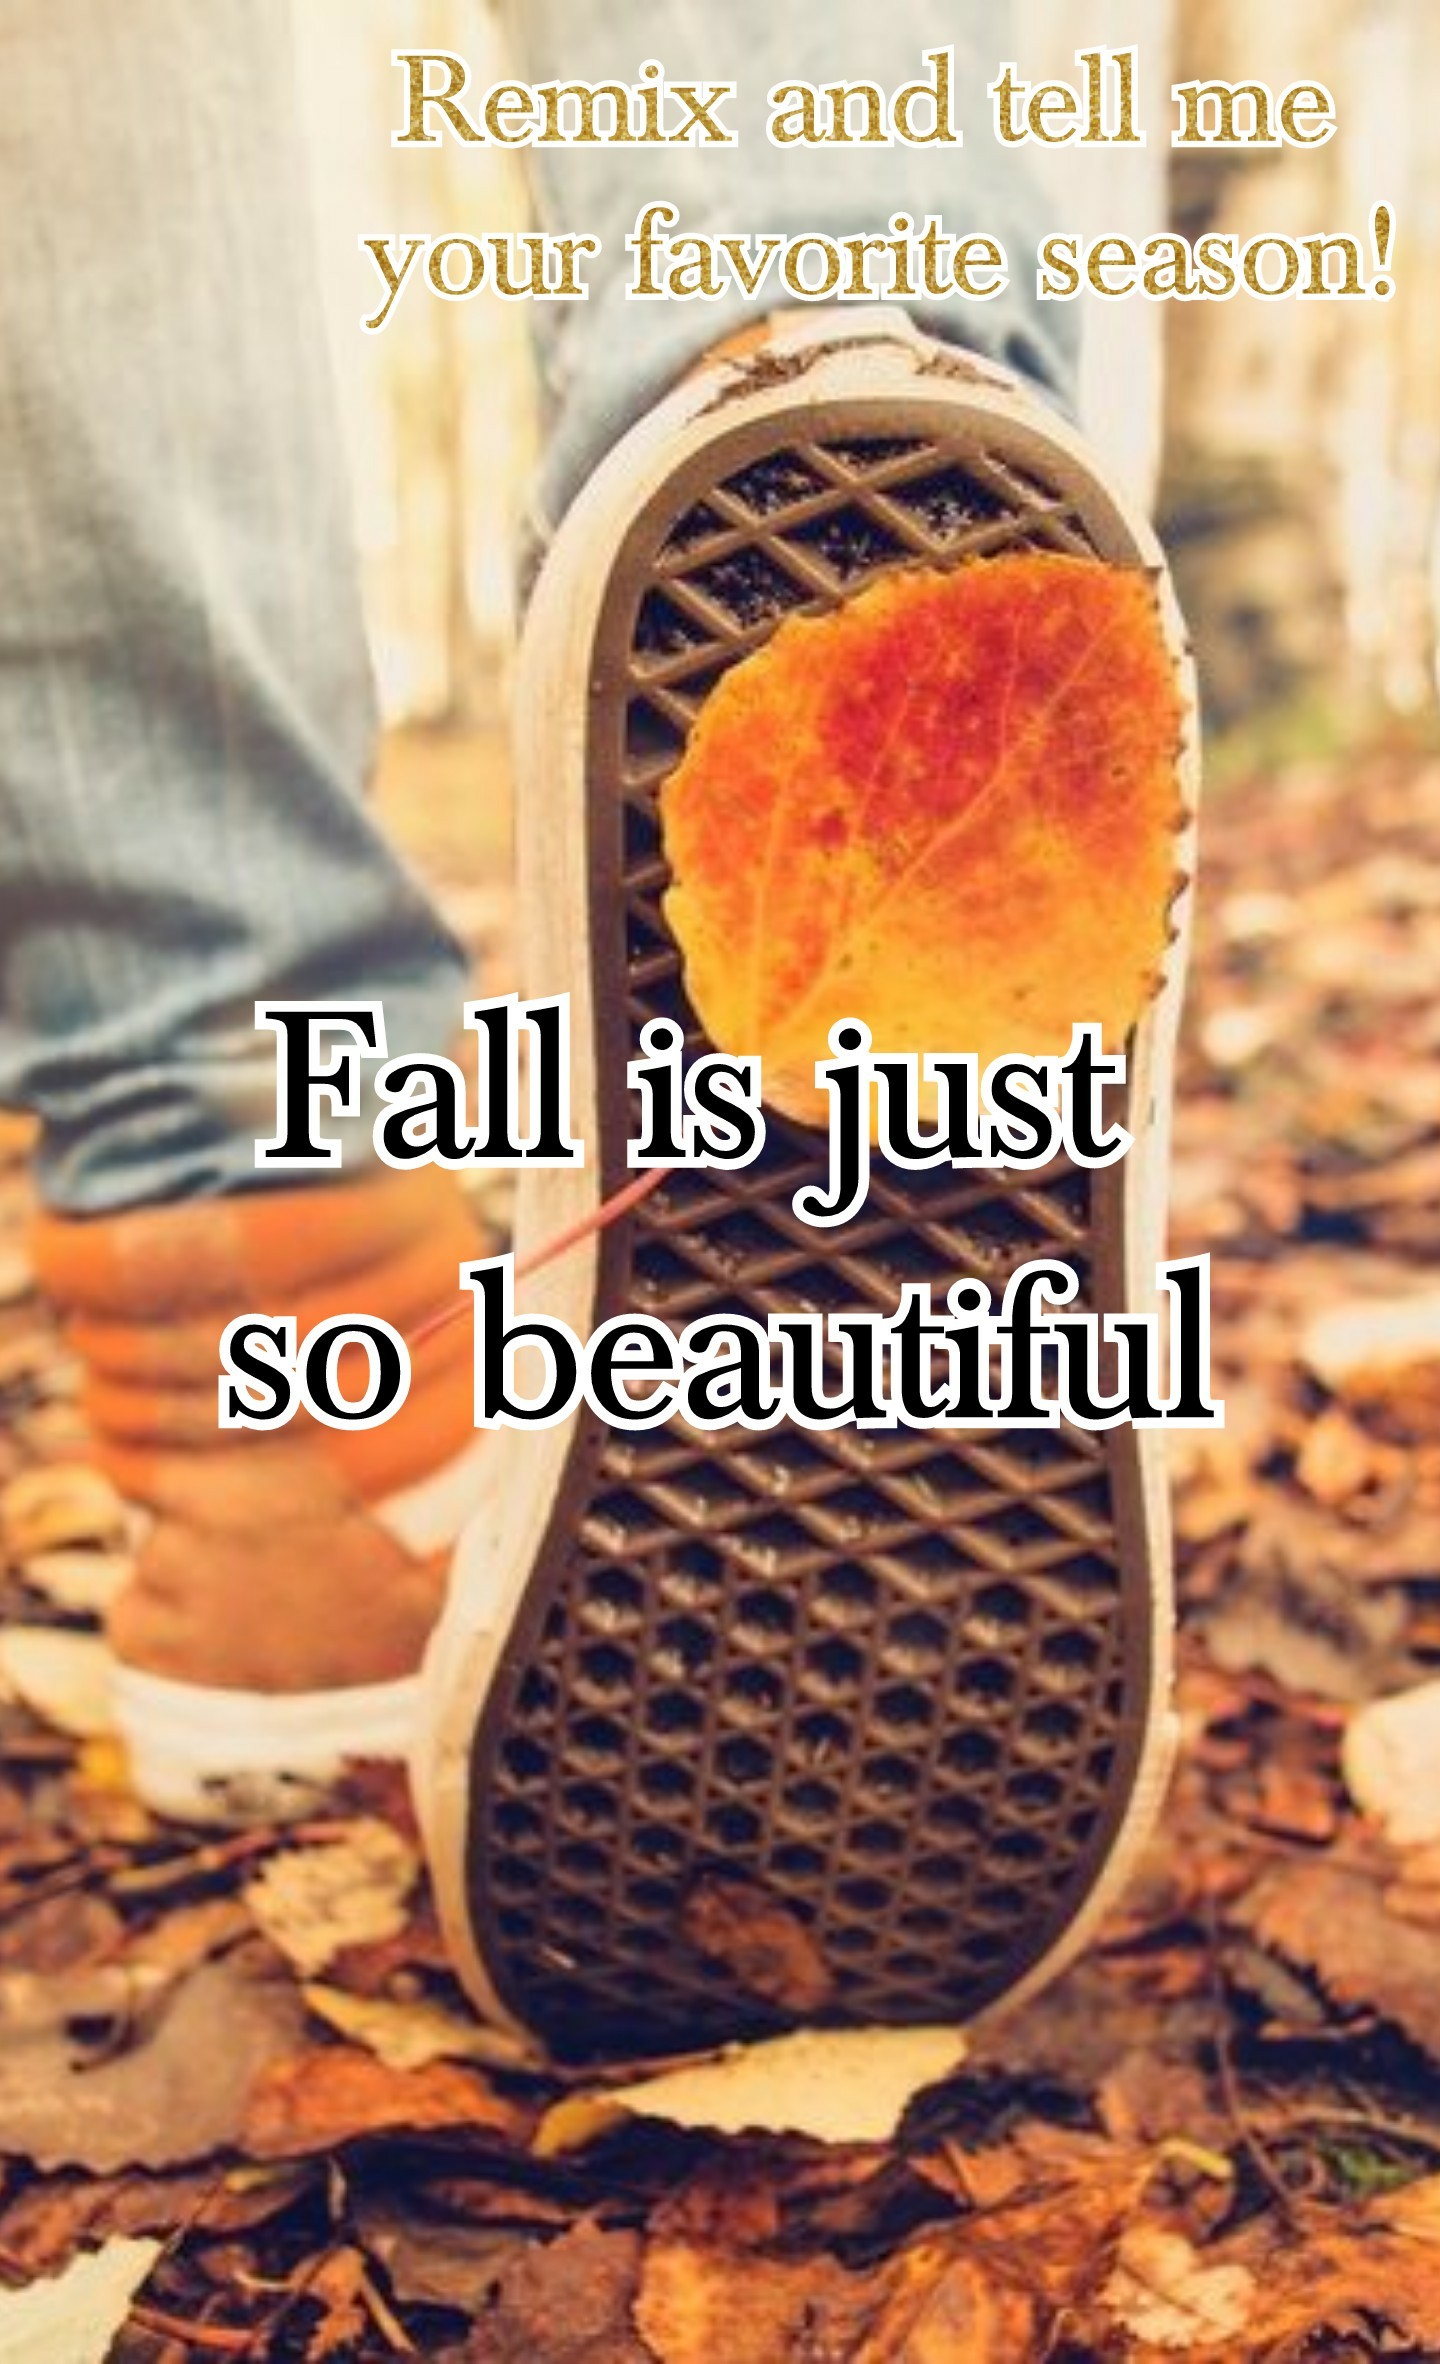 Fall is just so beautiful!